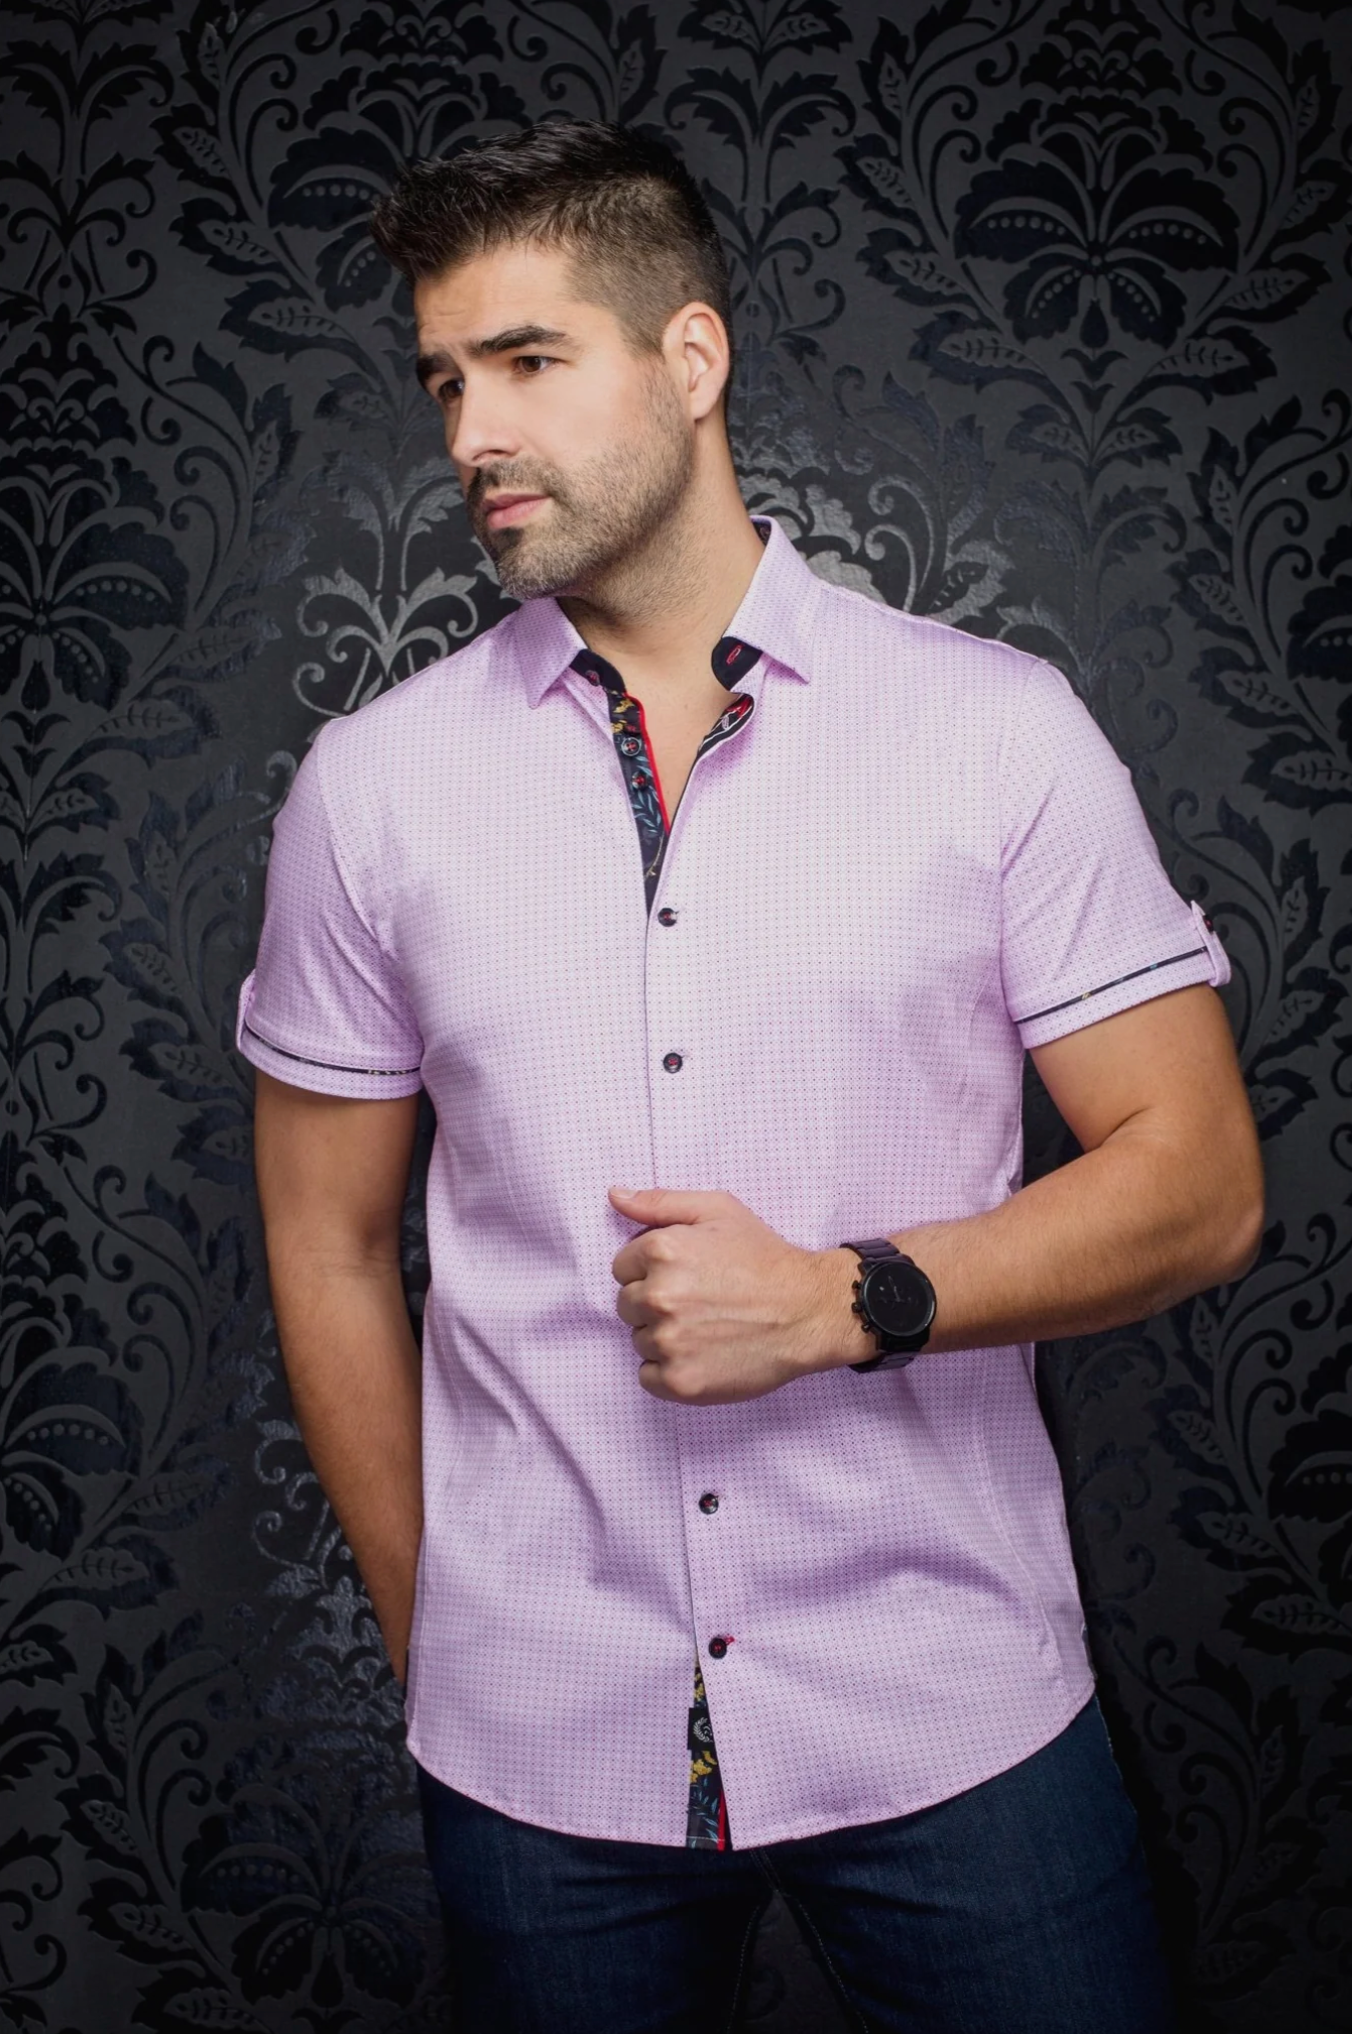 Men's casual dress polo shirt. Distinguish yourself with contrasting patterns and sophisticated details. Comfortable with high-end cotton fabric. Offers confidence and freedom of movement.